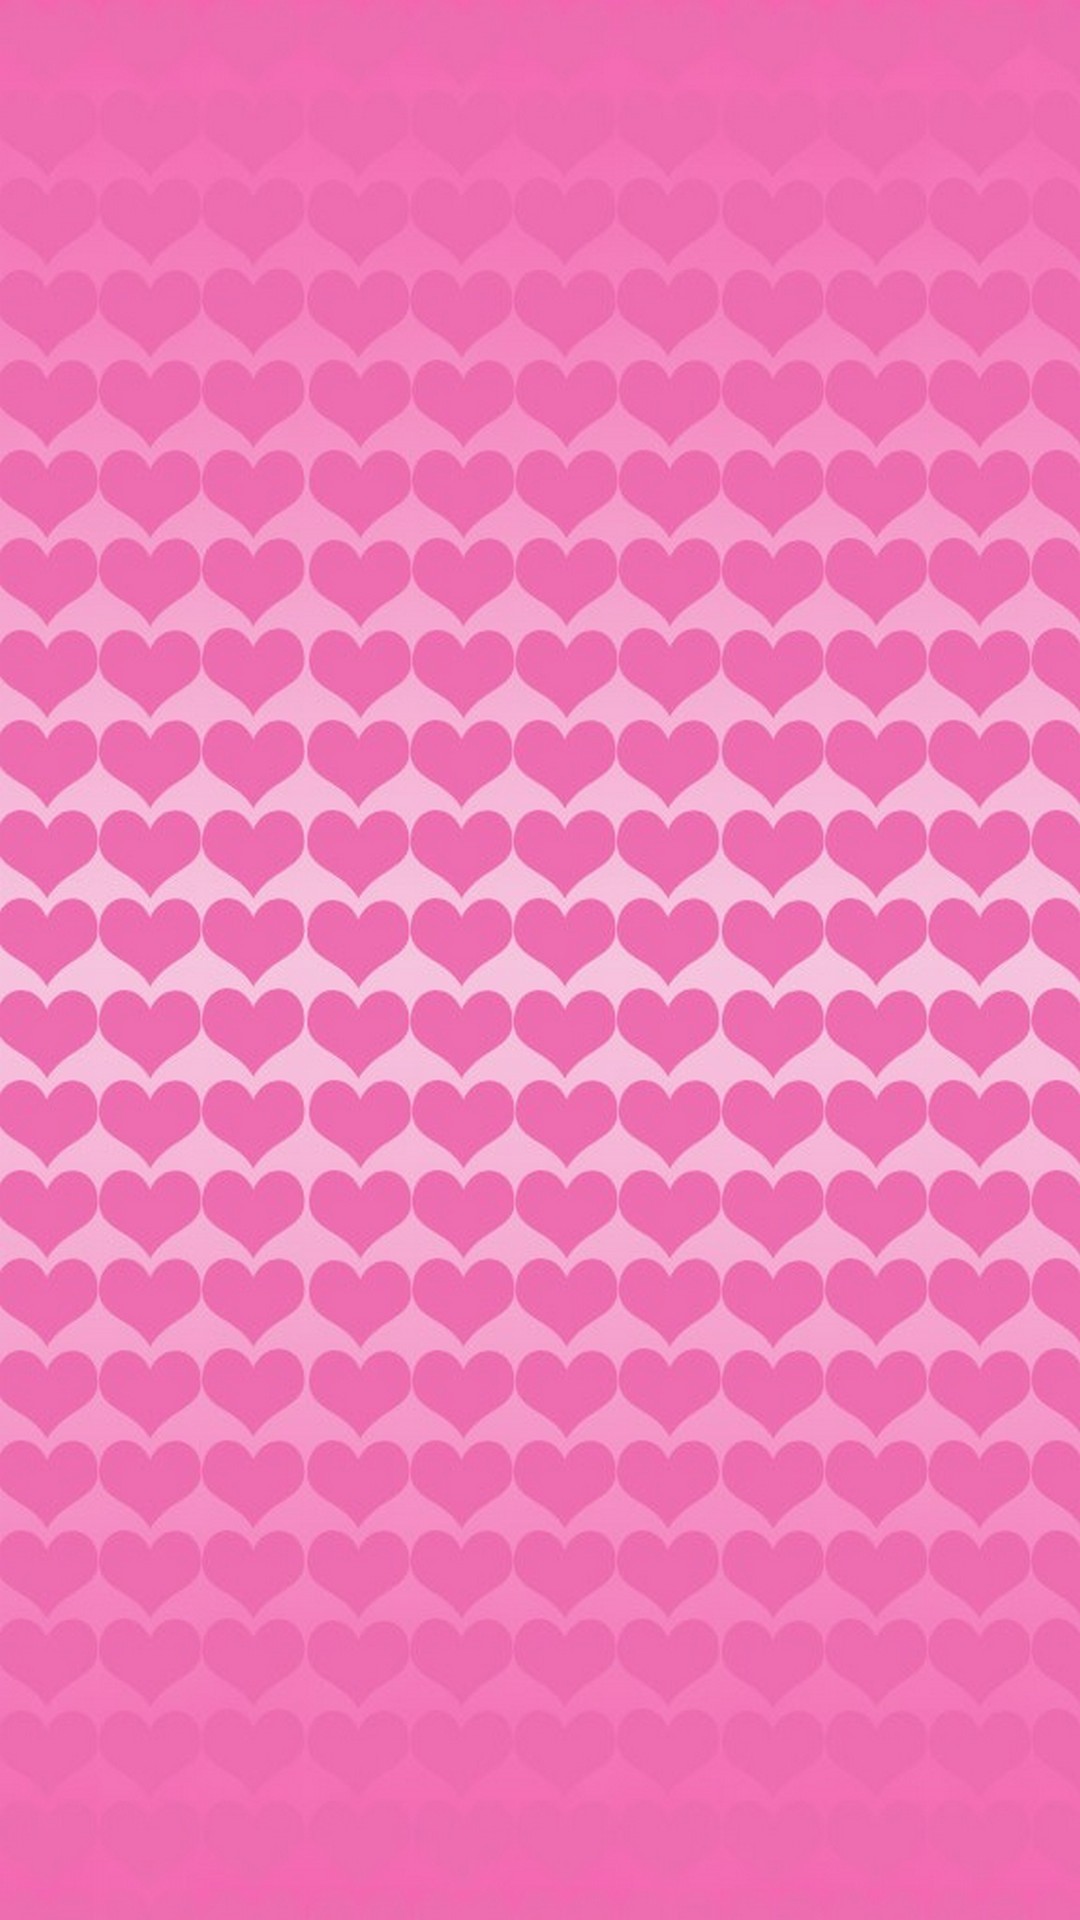 Pink Wallpaper Cute Girly For iPhone resolution 1080x1920